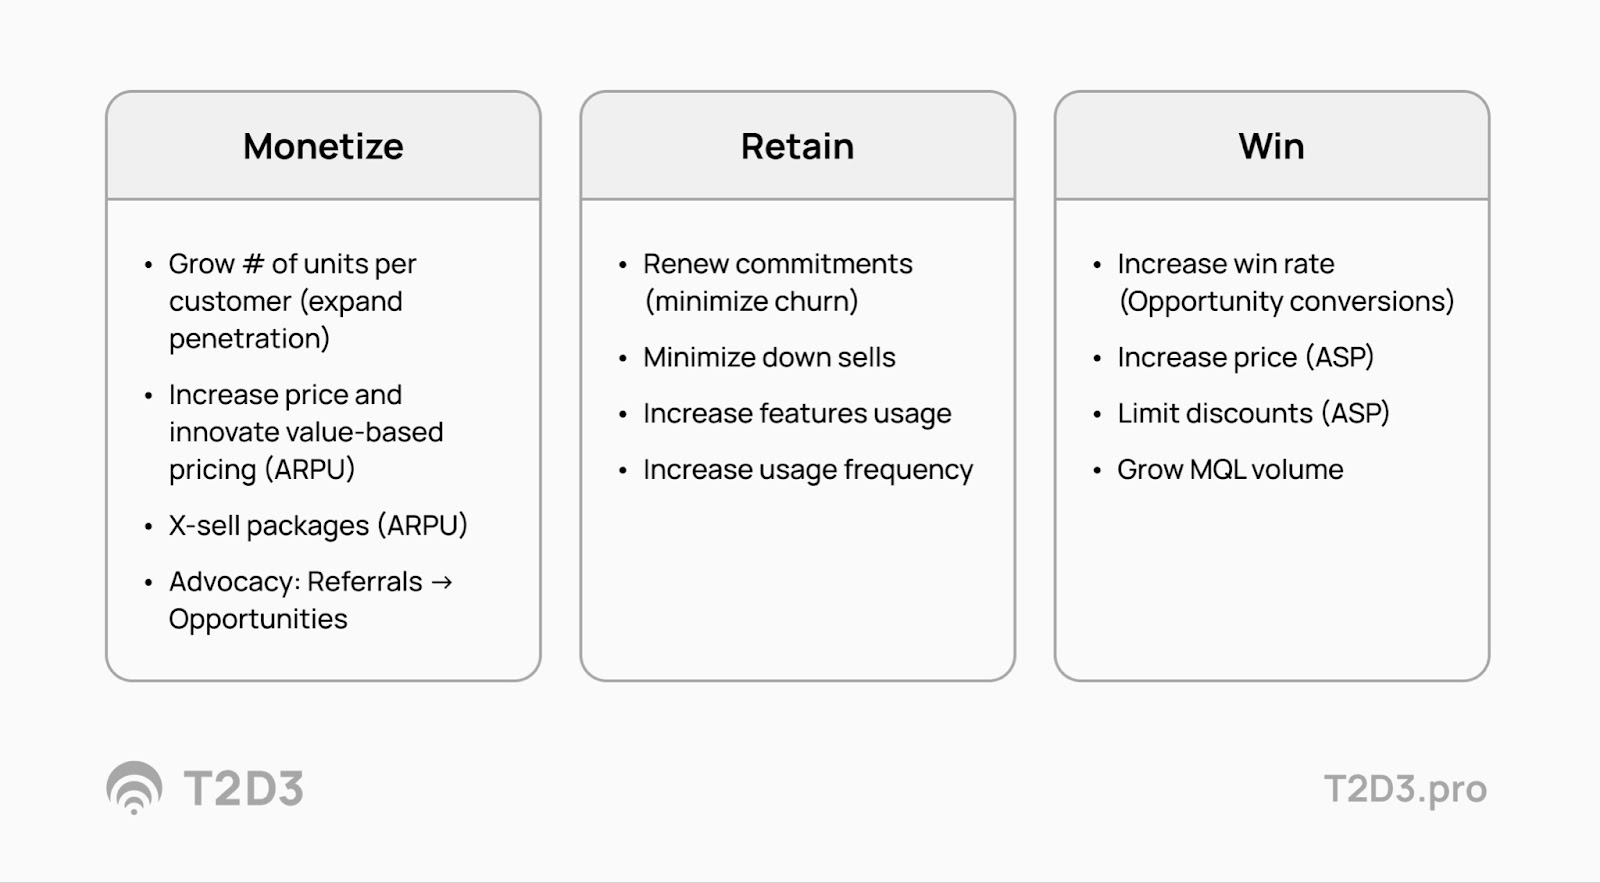 ARR growth drivers categories are monetize, retain and win